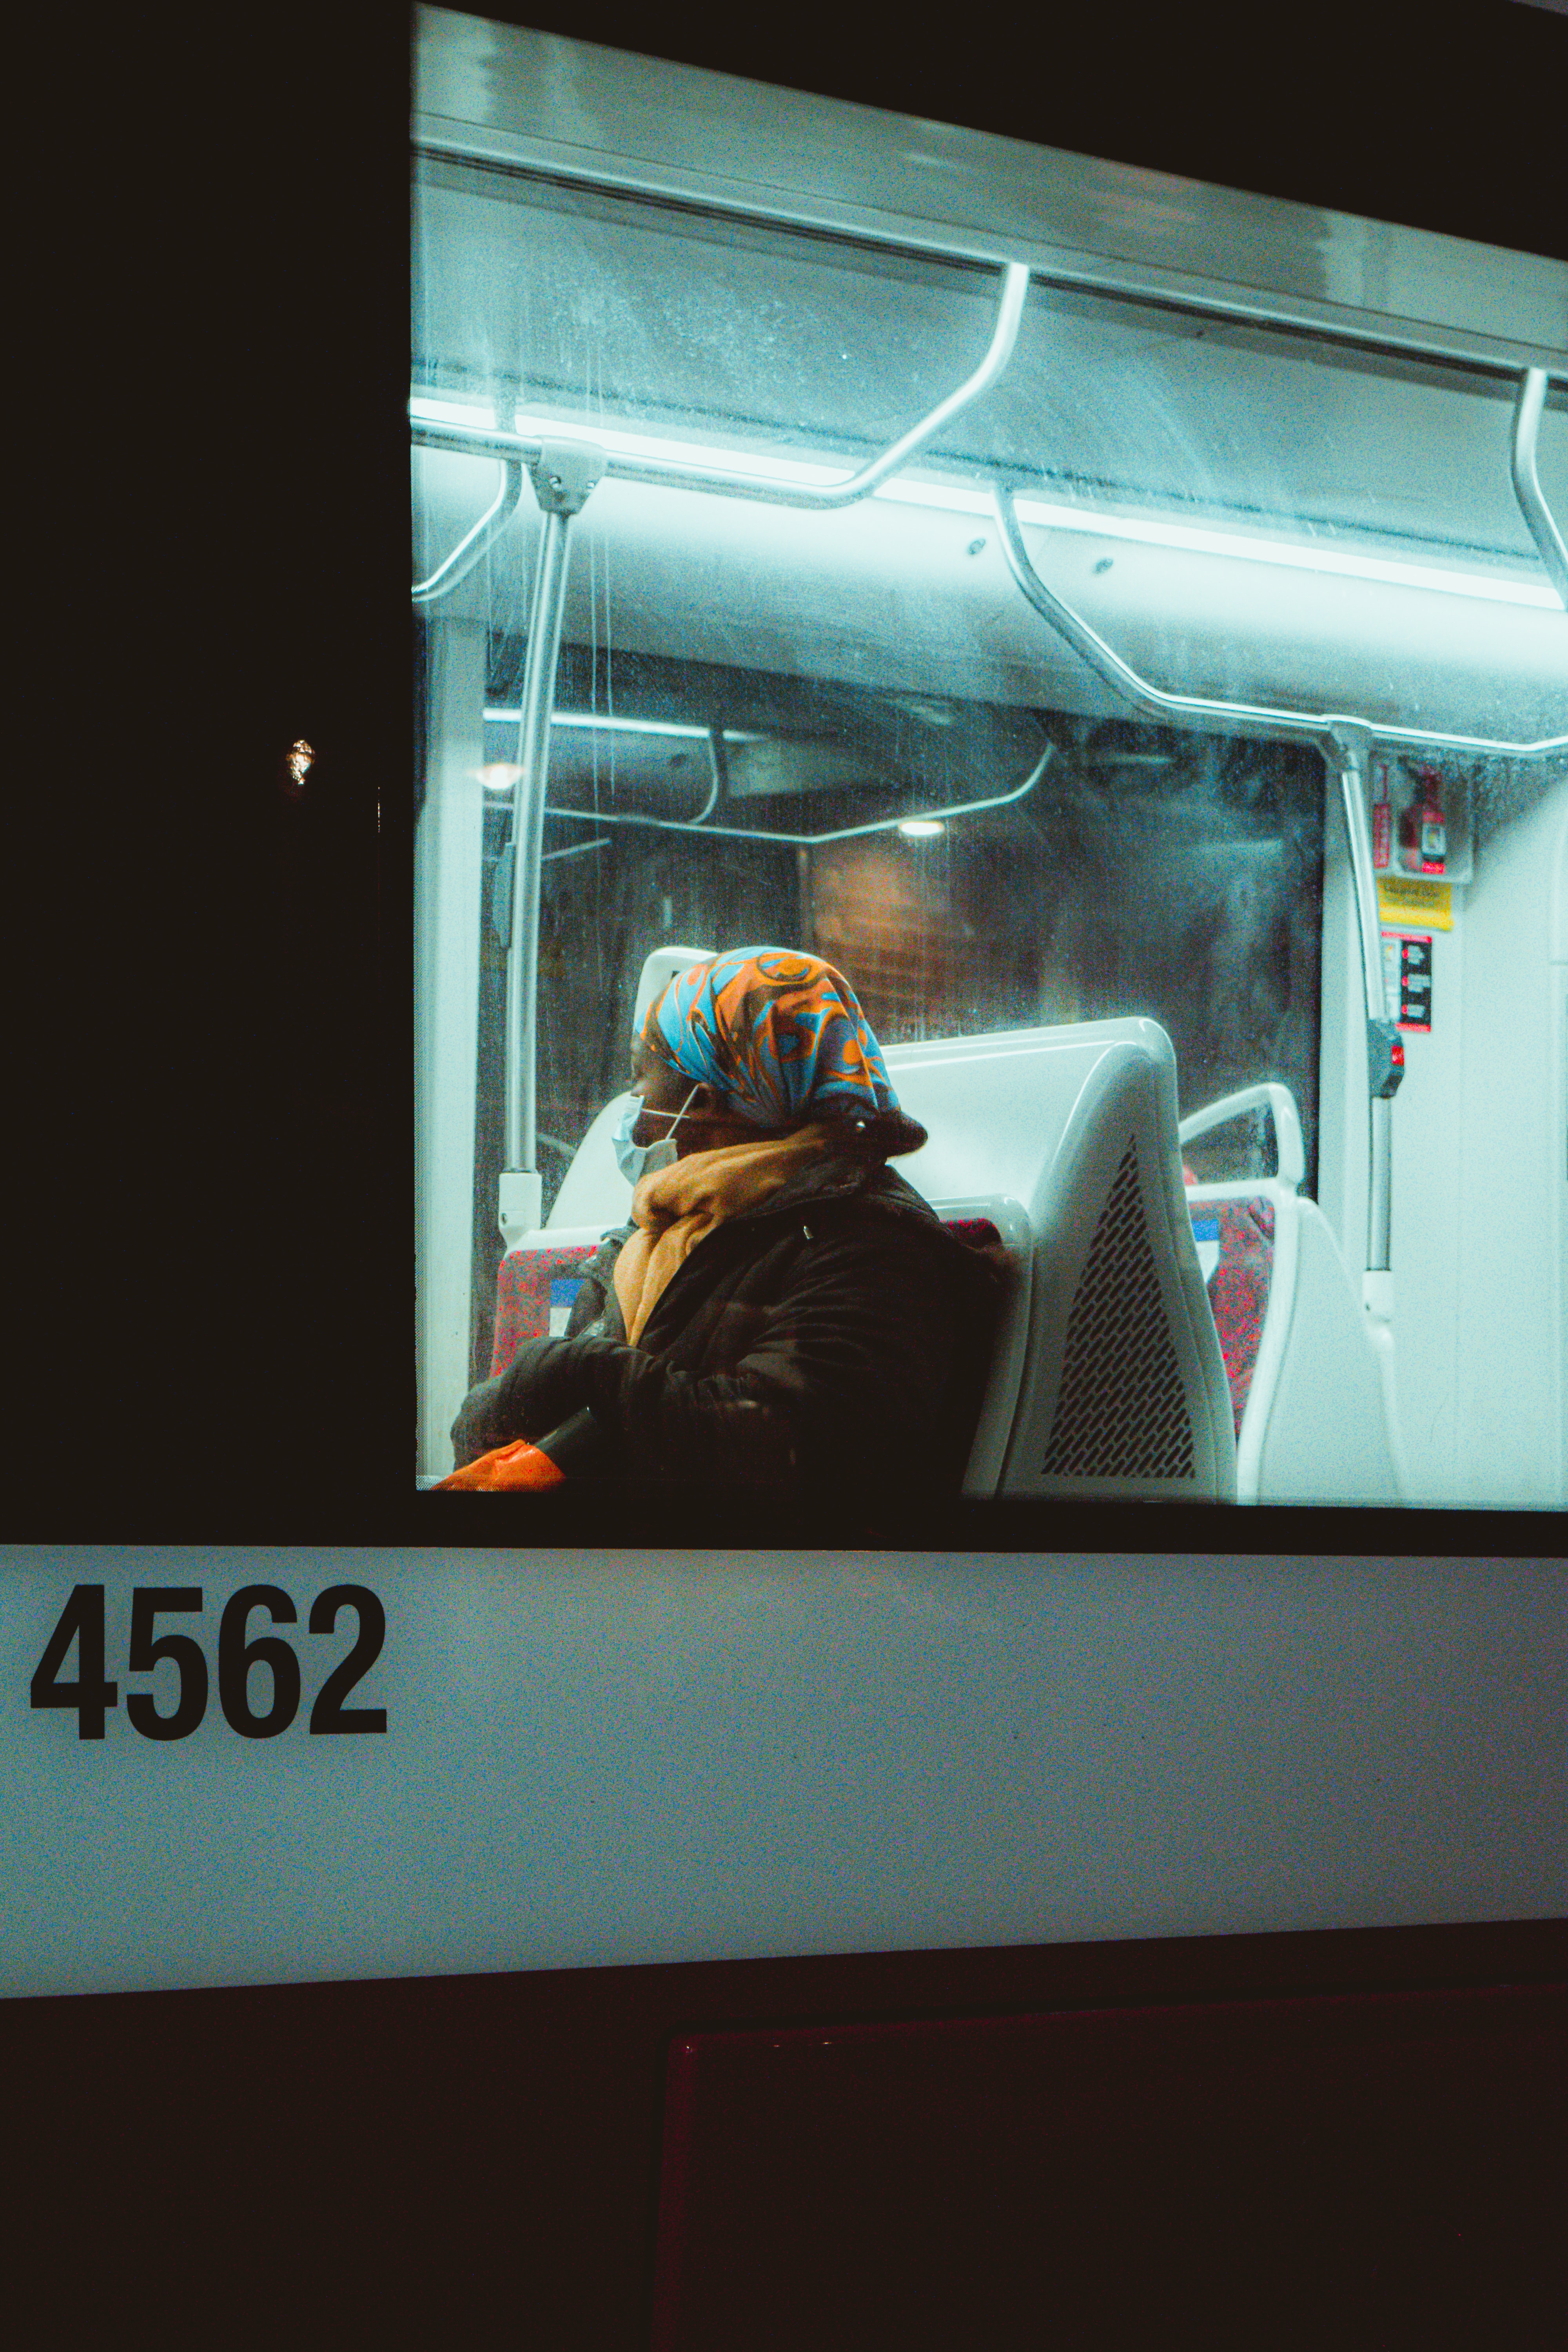 Woman wears a mask while aboard a TTC streetcar in Toronto, Canada